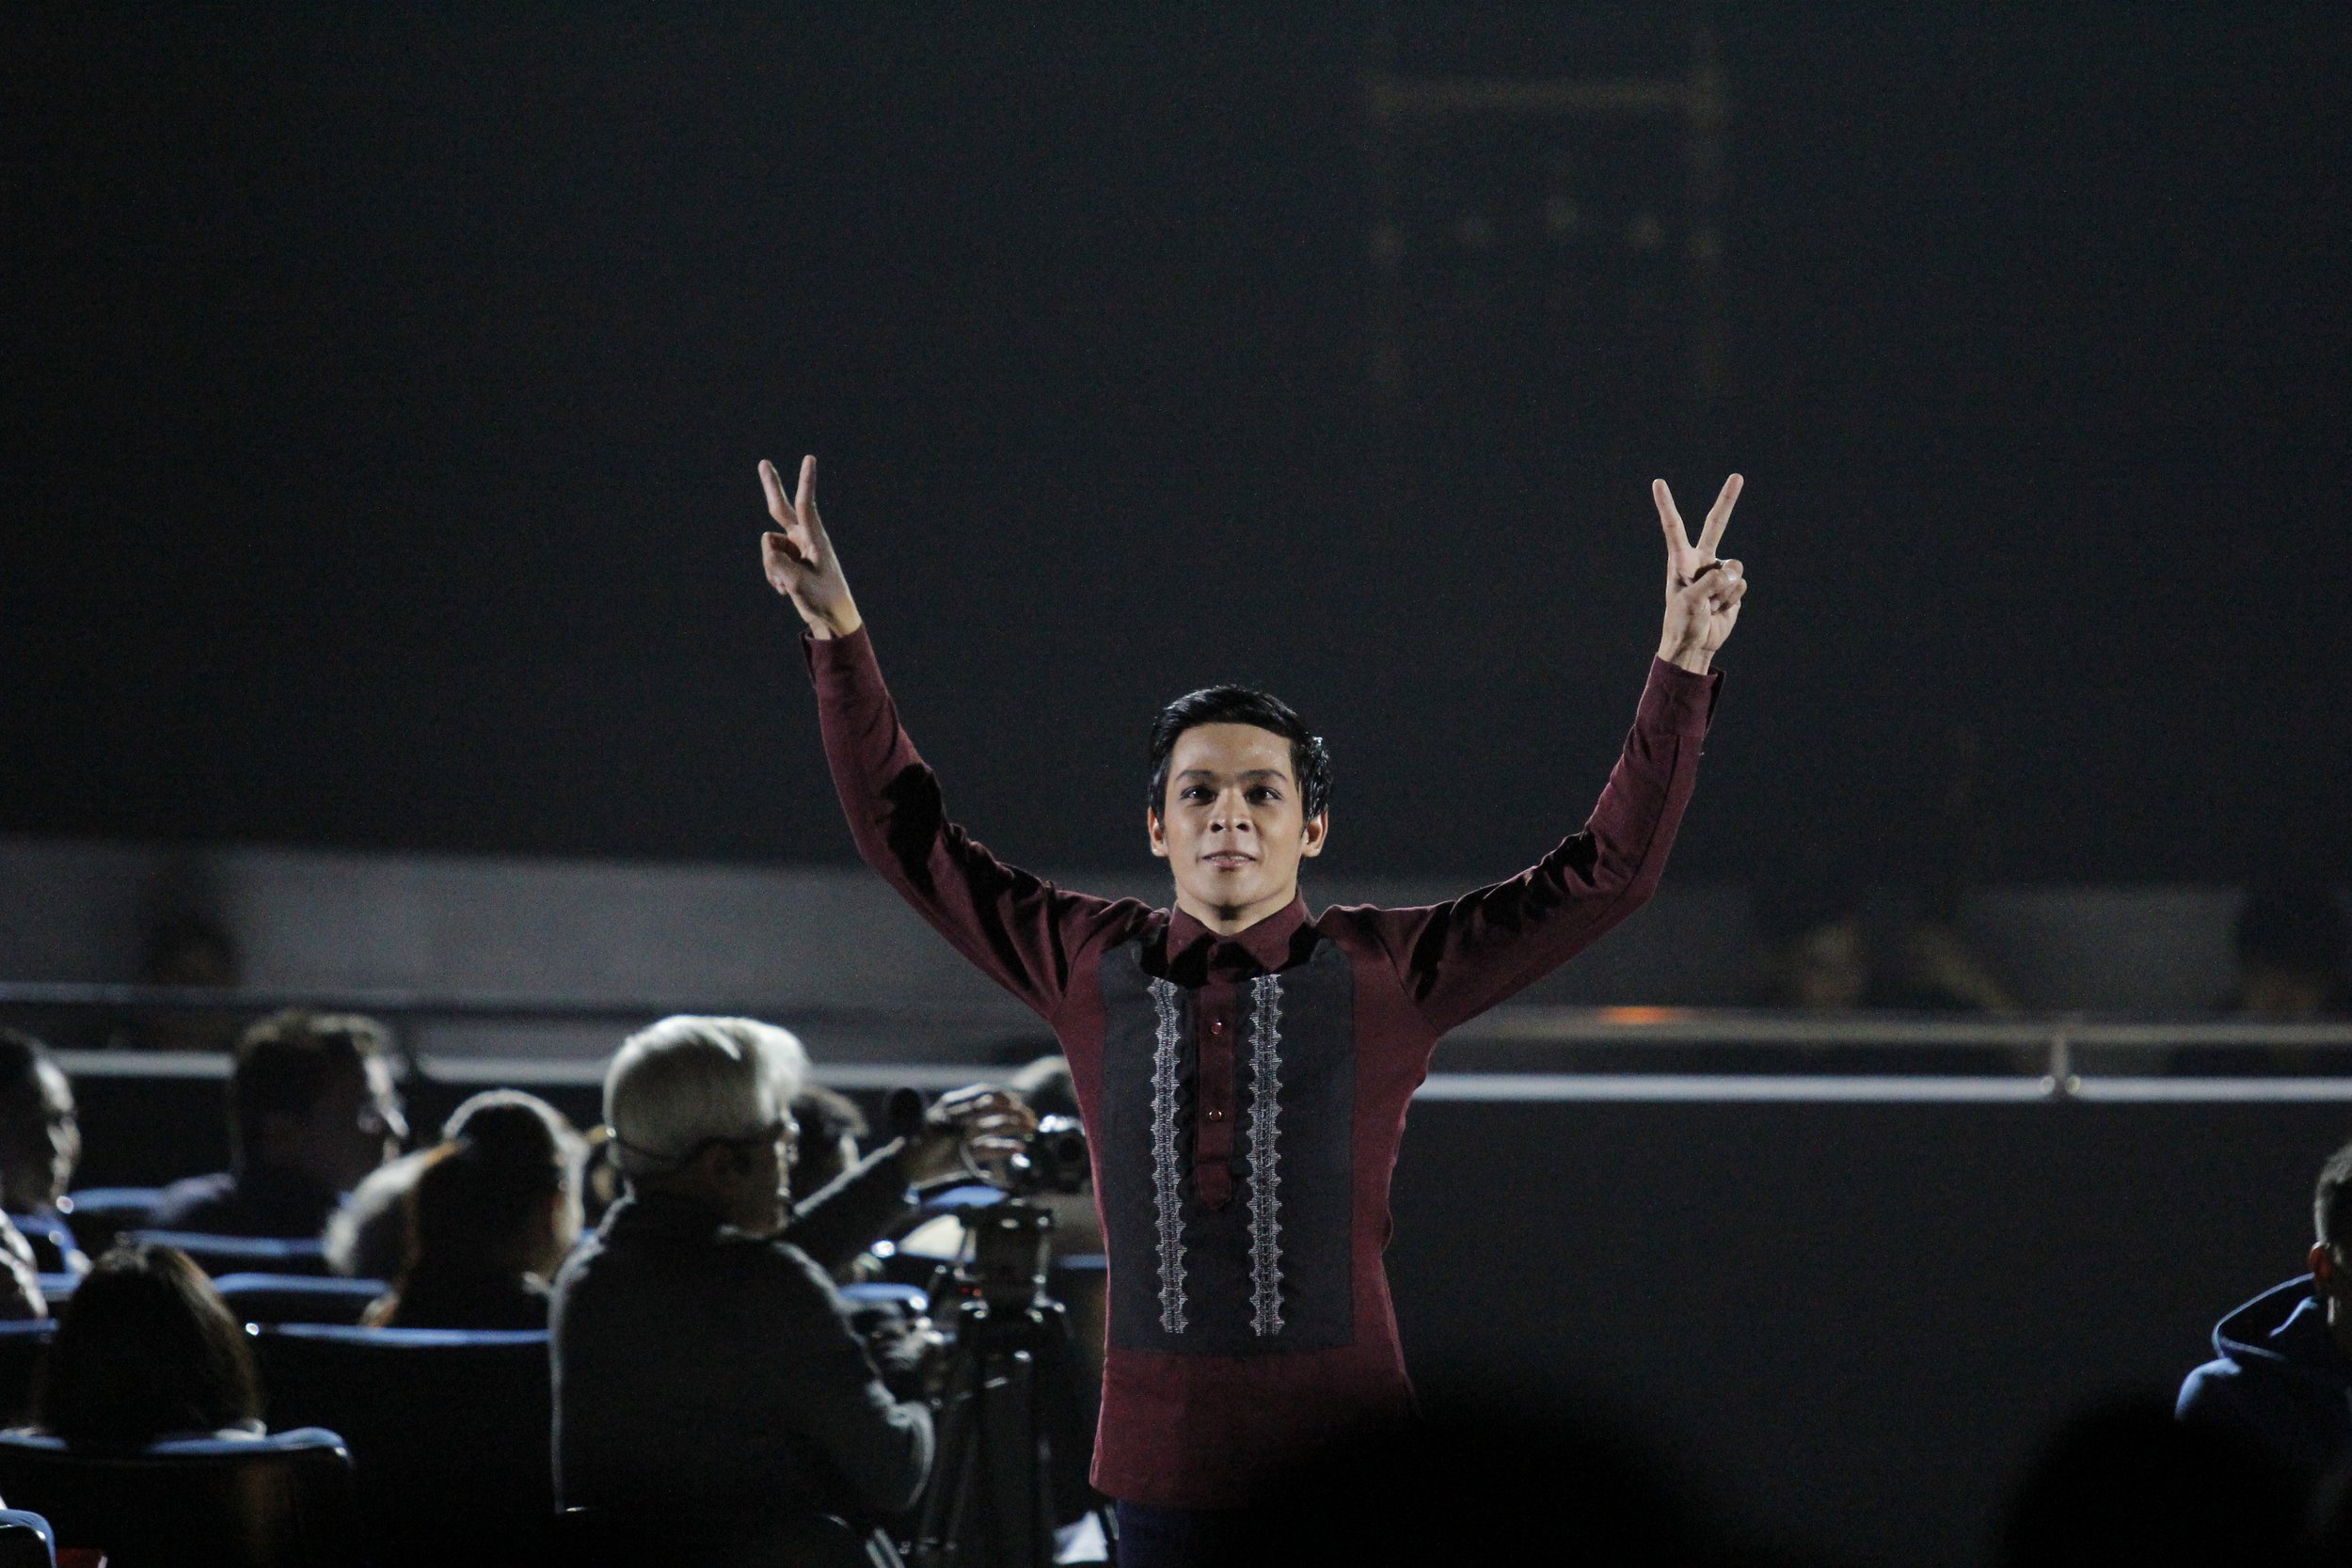    Gerardo Francisco makes a grand entrance, flashing the “V’ sign for victory and coming from the audience, as his character – the wily politician Ferdinand – reappears in Act 2 of Martin Lawrance’s  Rebel  (2016). Just like all the costumes feature